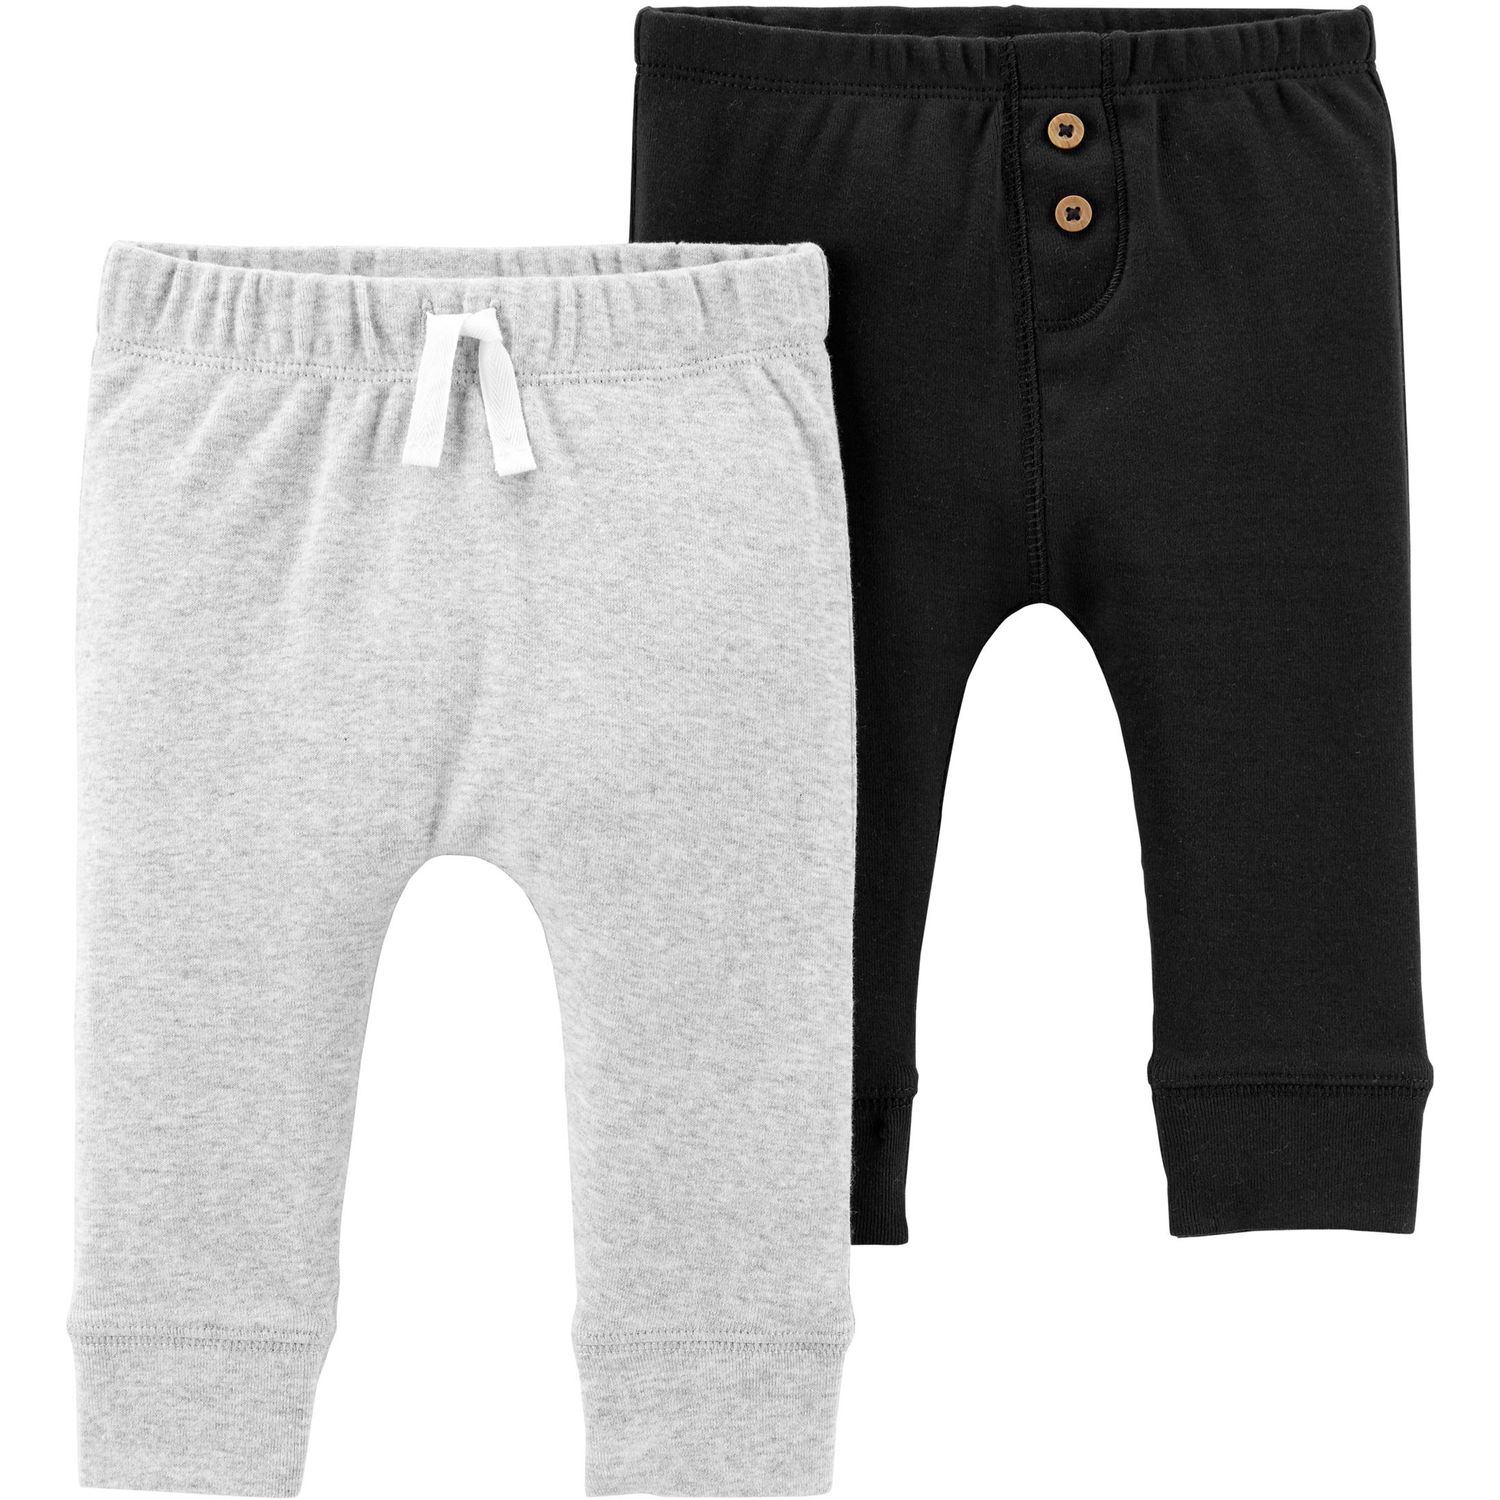 Baby Boy Carter's 2-pack Cotton Pants